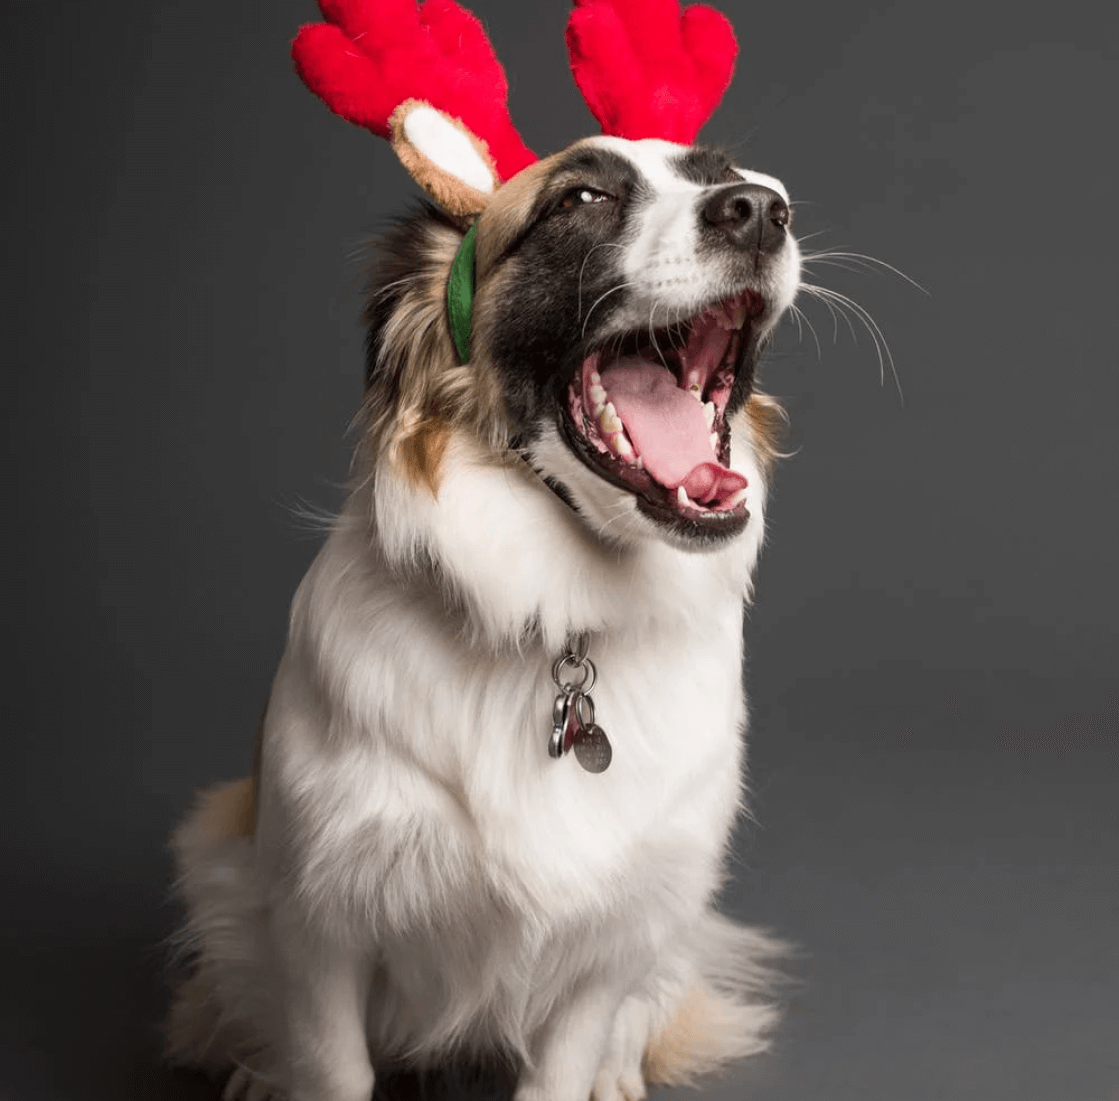 another dog with felt reindeer antlers